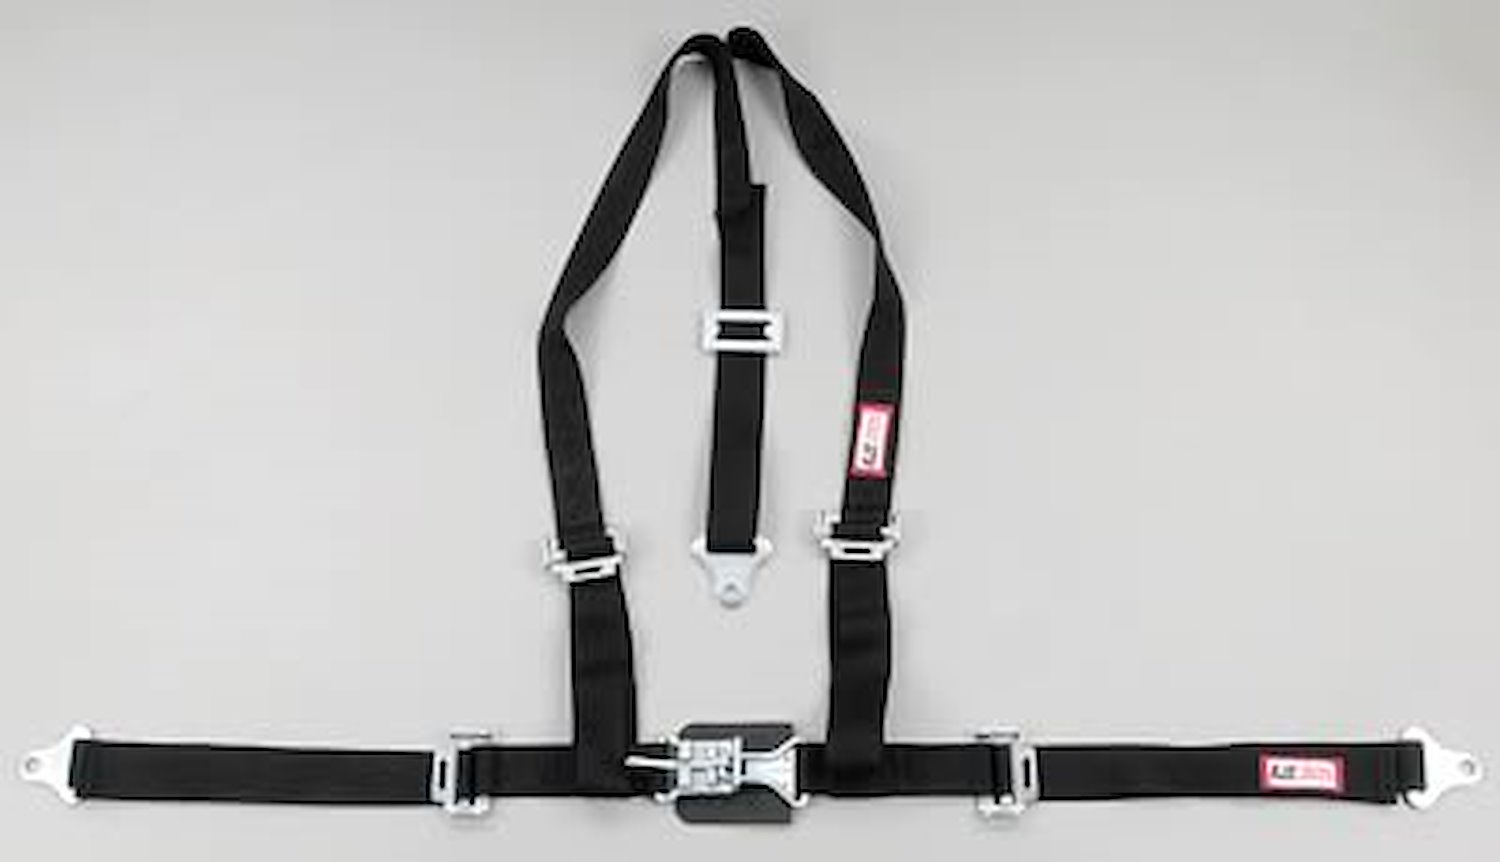 NON-SFI L&L HARNESS 3 PULL DOWN Lap Belt SNAP SEWN IN 2 S.H. Individual FLOOR Mount WRAP/SNAP ORANGE